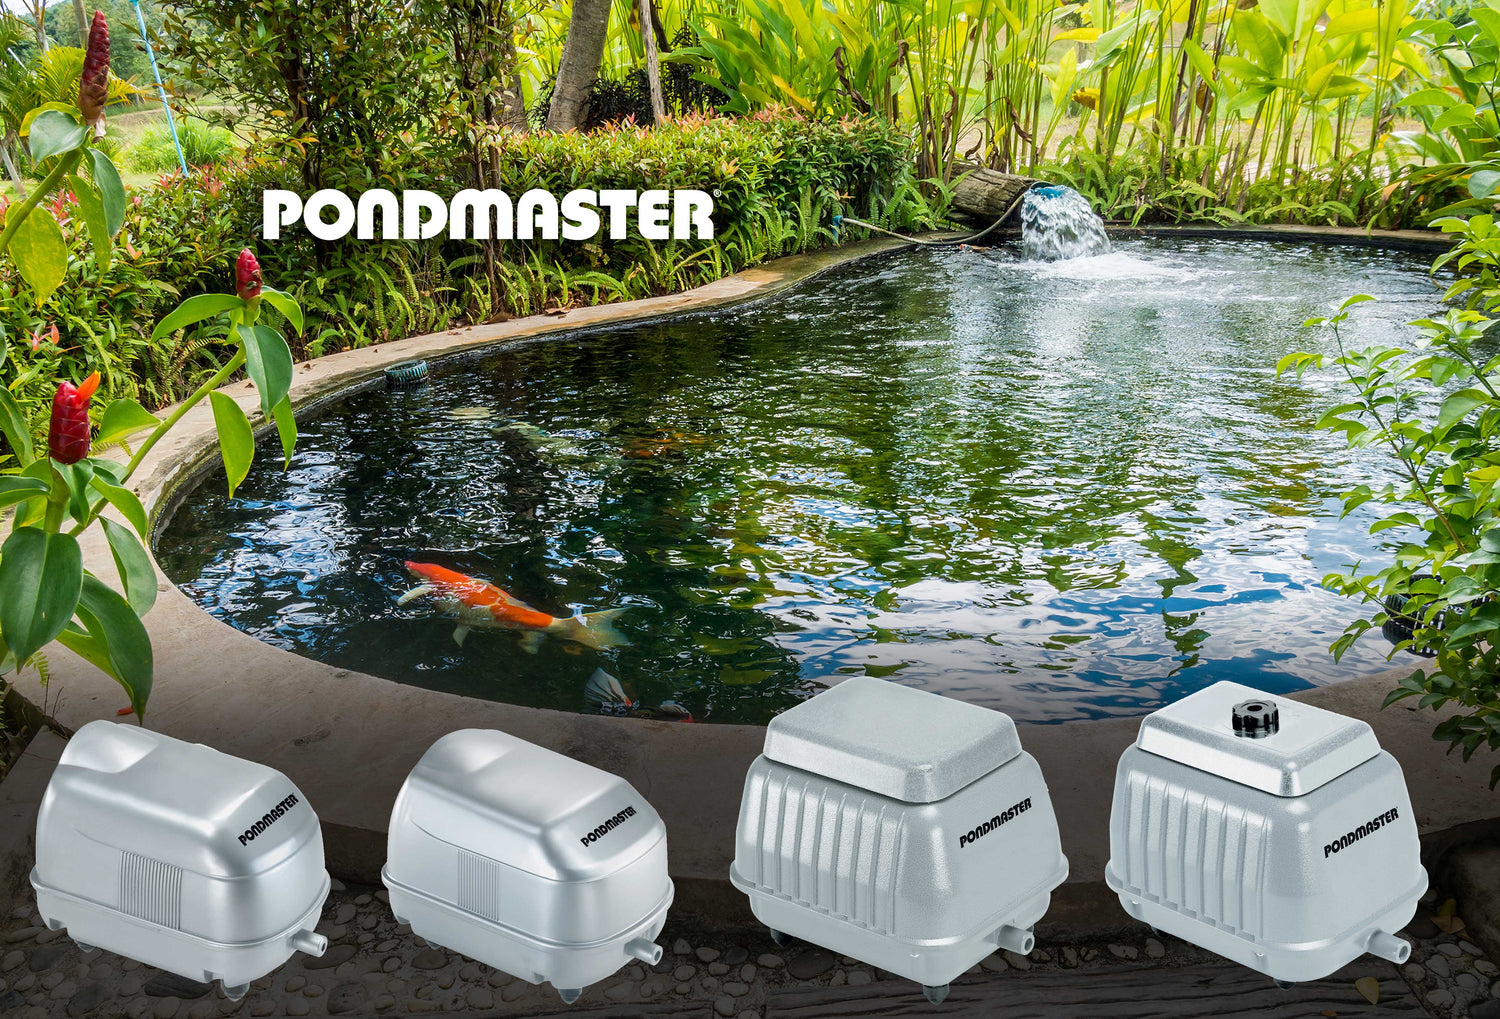 How to Choose an Air Pump for Your Pond?